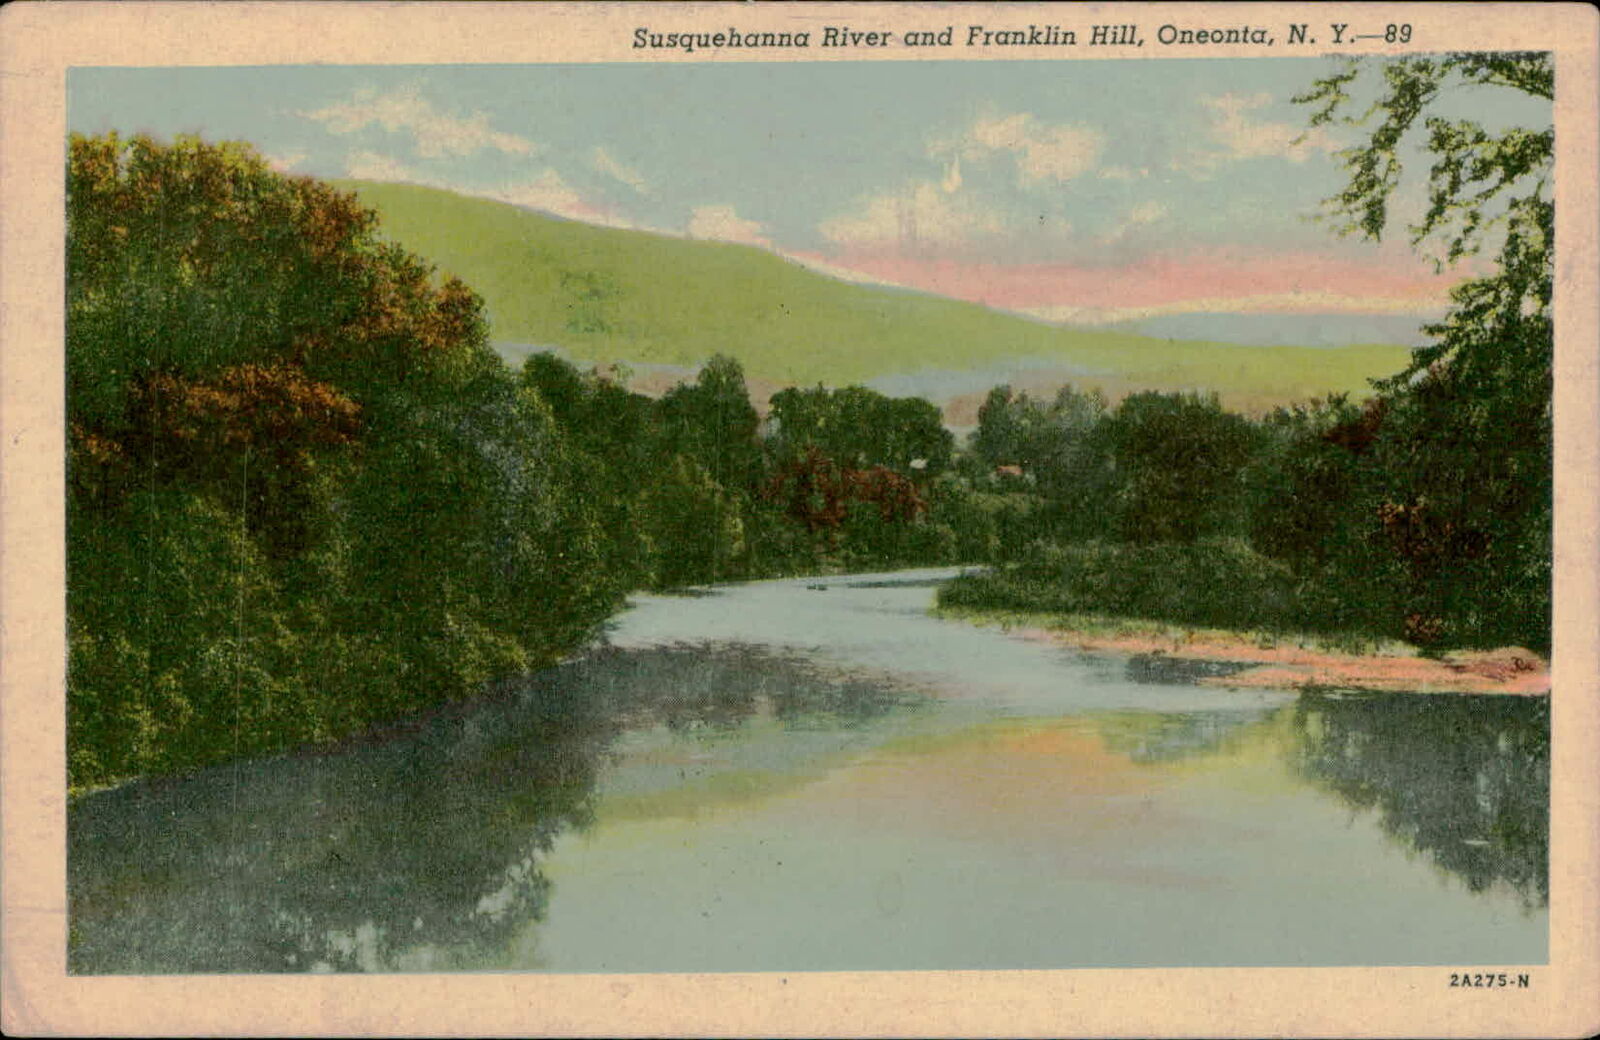 Postcard: Susquehanna River and Franklin Hill, Oneonta, N. Y.-89 2A275